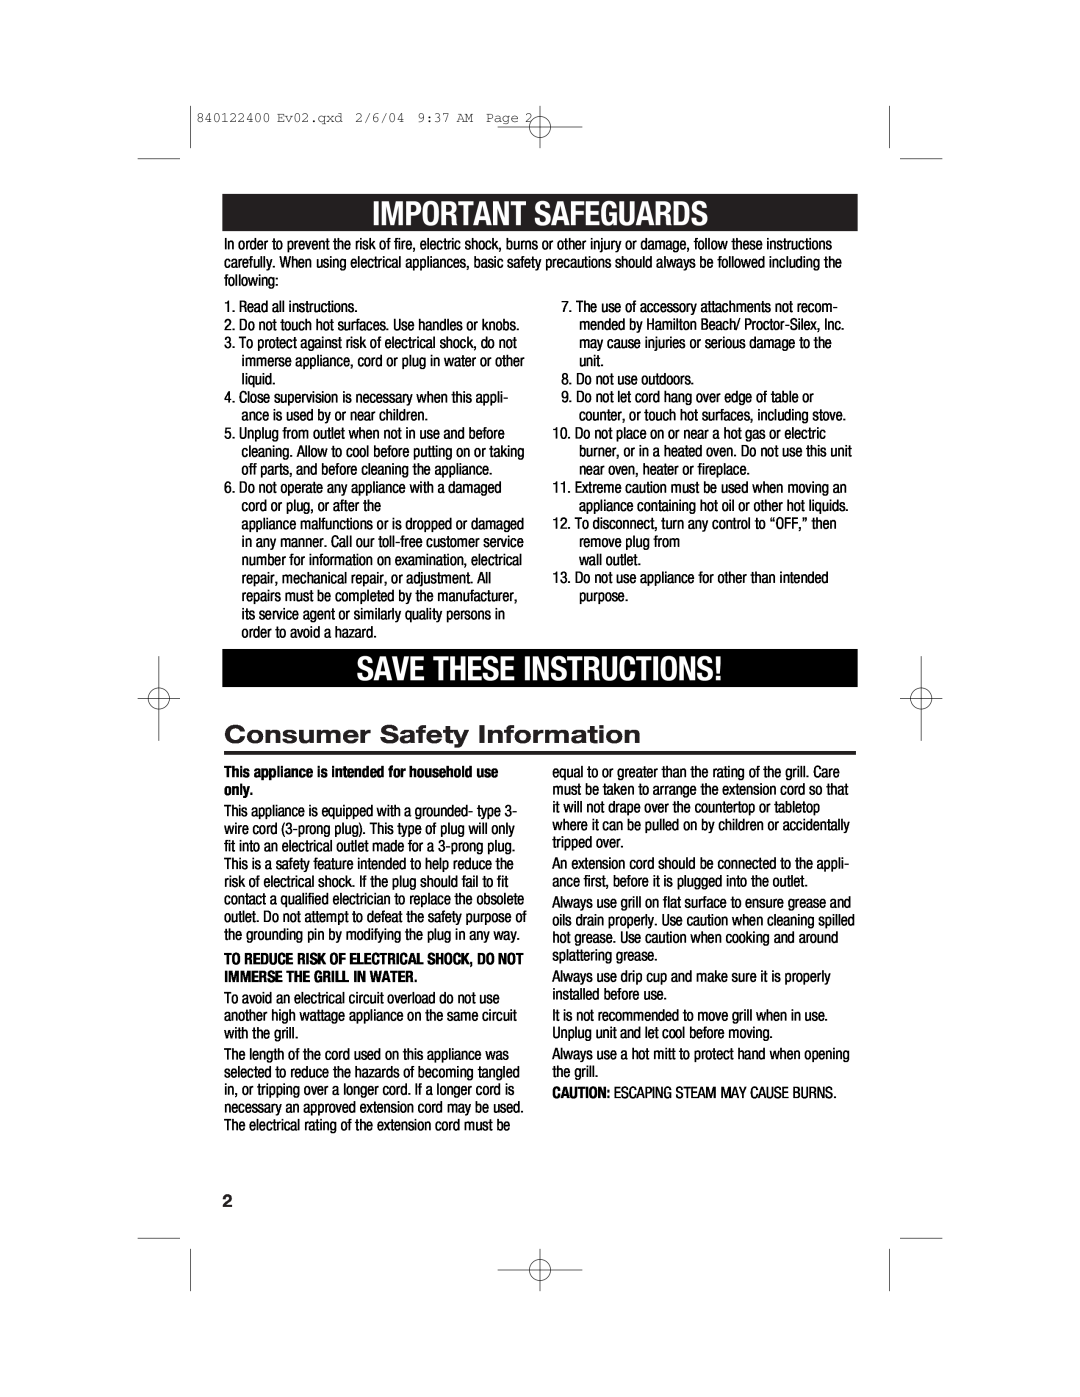 Hamilton Beach 25326C manual Important Safeguards, Save These Instructions, Consumer Safety Information 